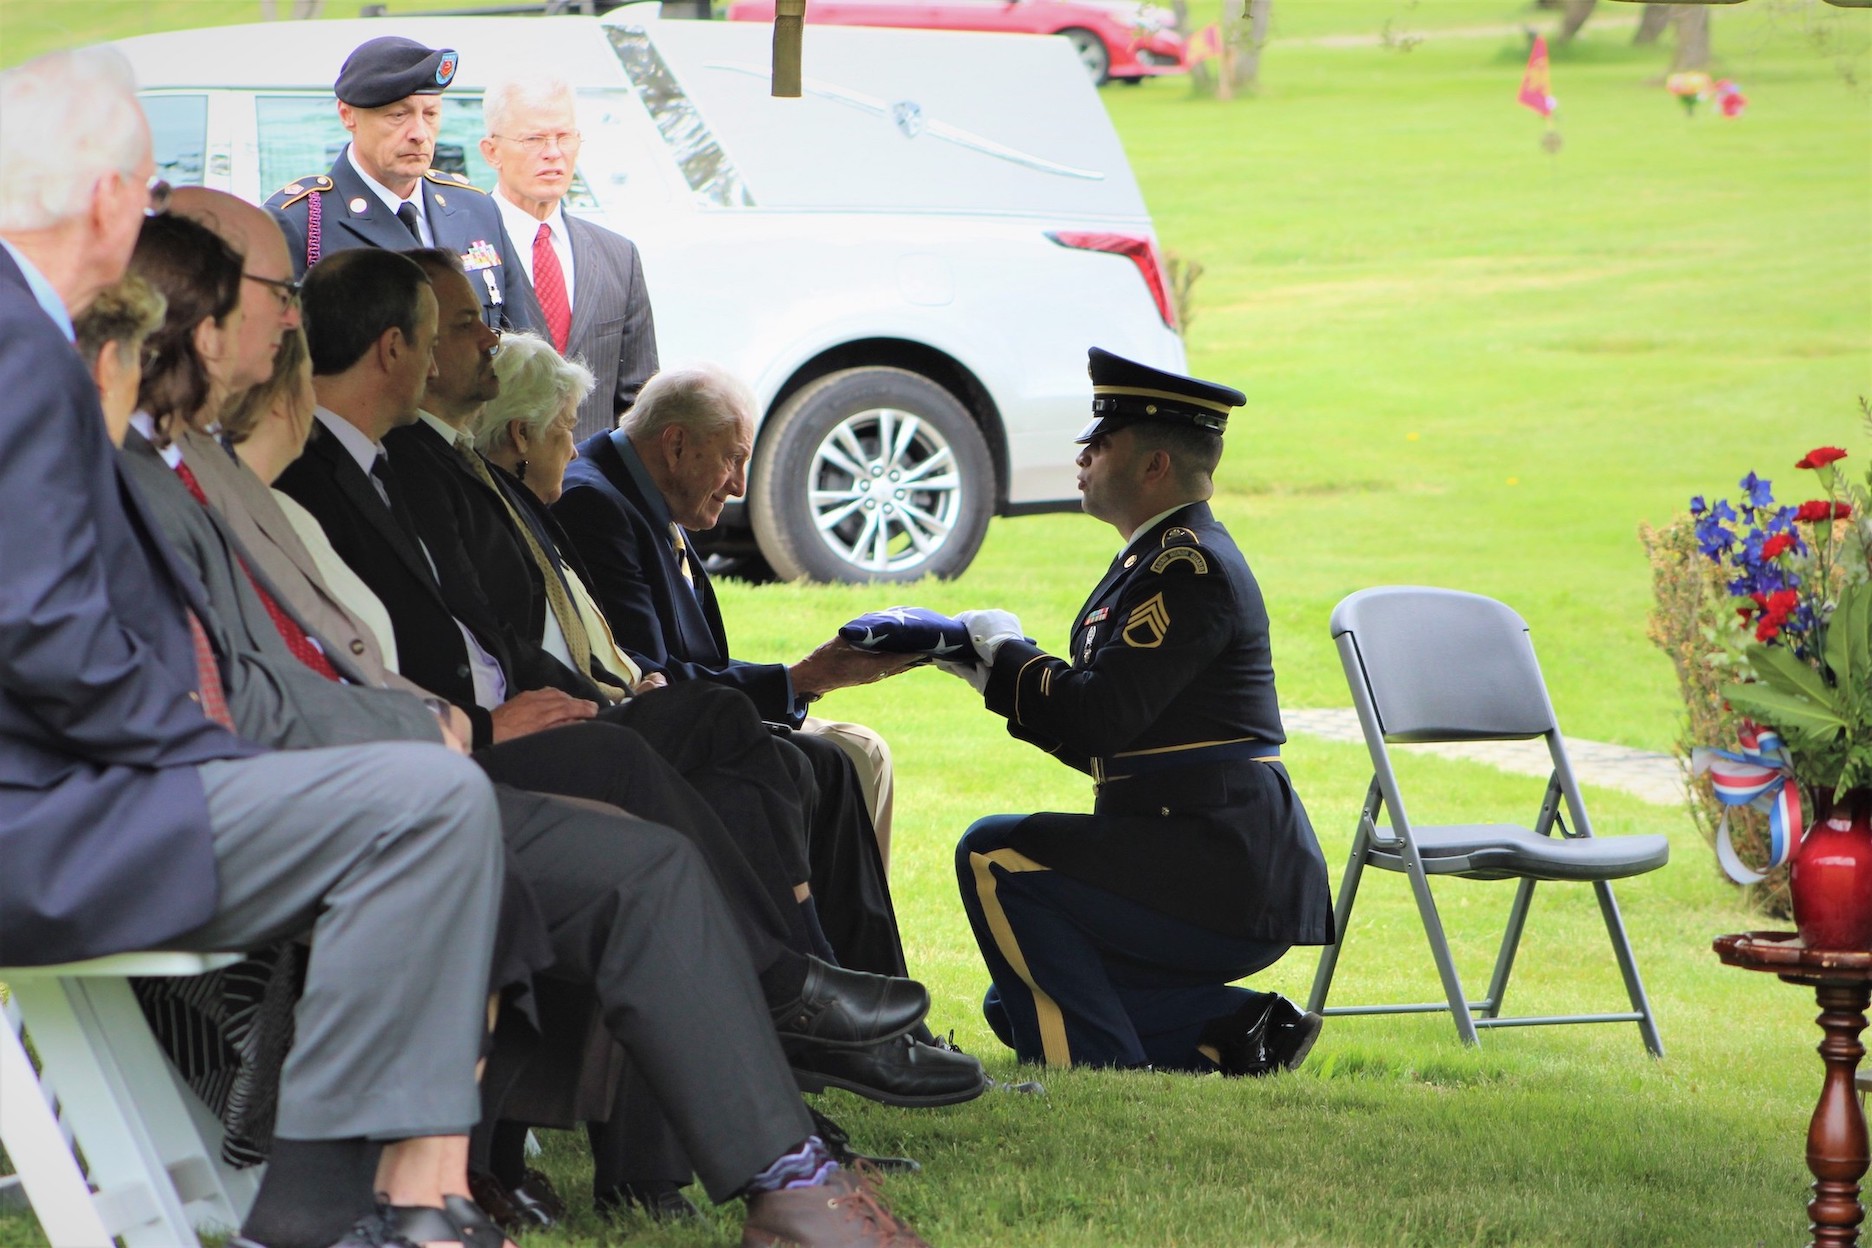 Staff Sgt. Natanael Perez presents the American flag to Gloyd `Dean` Kimball, cousin of late Korean War MIA Cpl. Robert Charles Agard Jr., as remains were interred on Friday, May 27. (Photo courtesy of readMedia)